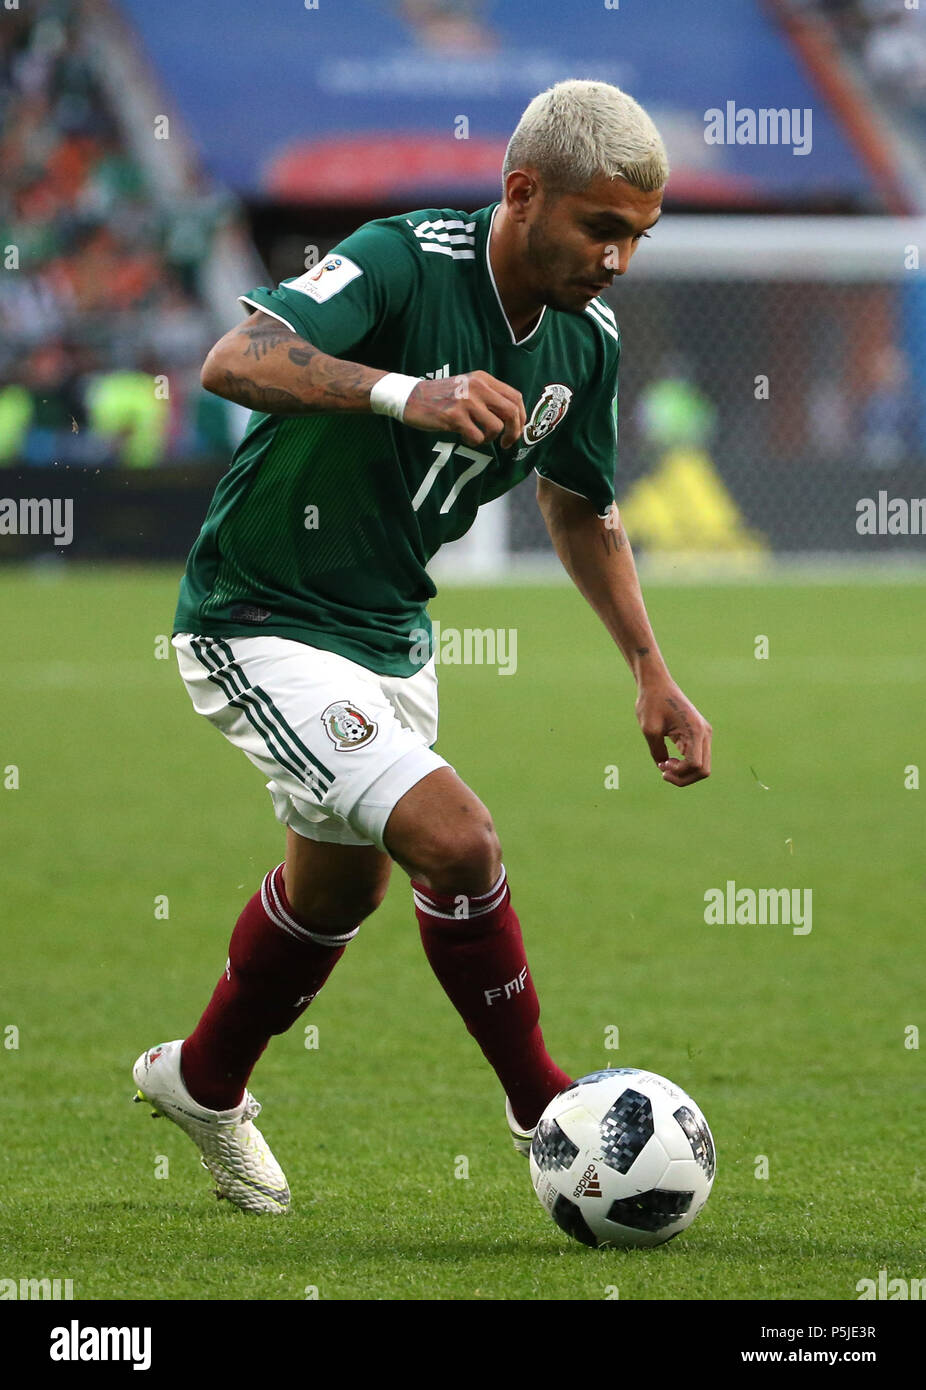 Yekaterinburg, Russia. 27th June, 2018. Jesus Corona of Mexico controls the ball during the 2018 FIFA World Cup Group F match between Mexico and Sweden in Yekaterinburg, Russia, June 27, 2018. Sweden won 3-0. Mexico and Sweden advanced to the round of 16. Credit: Li Ming/Xinhua/Alamy Live News Stock Photo